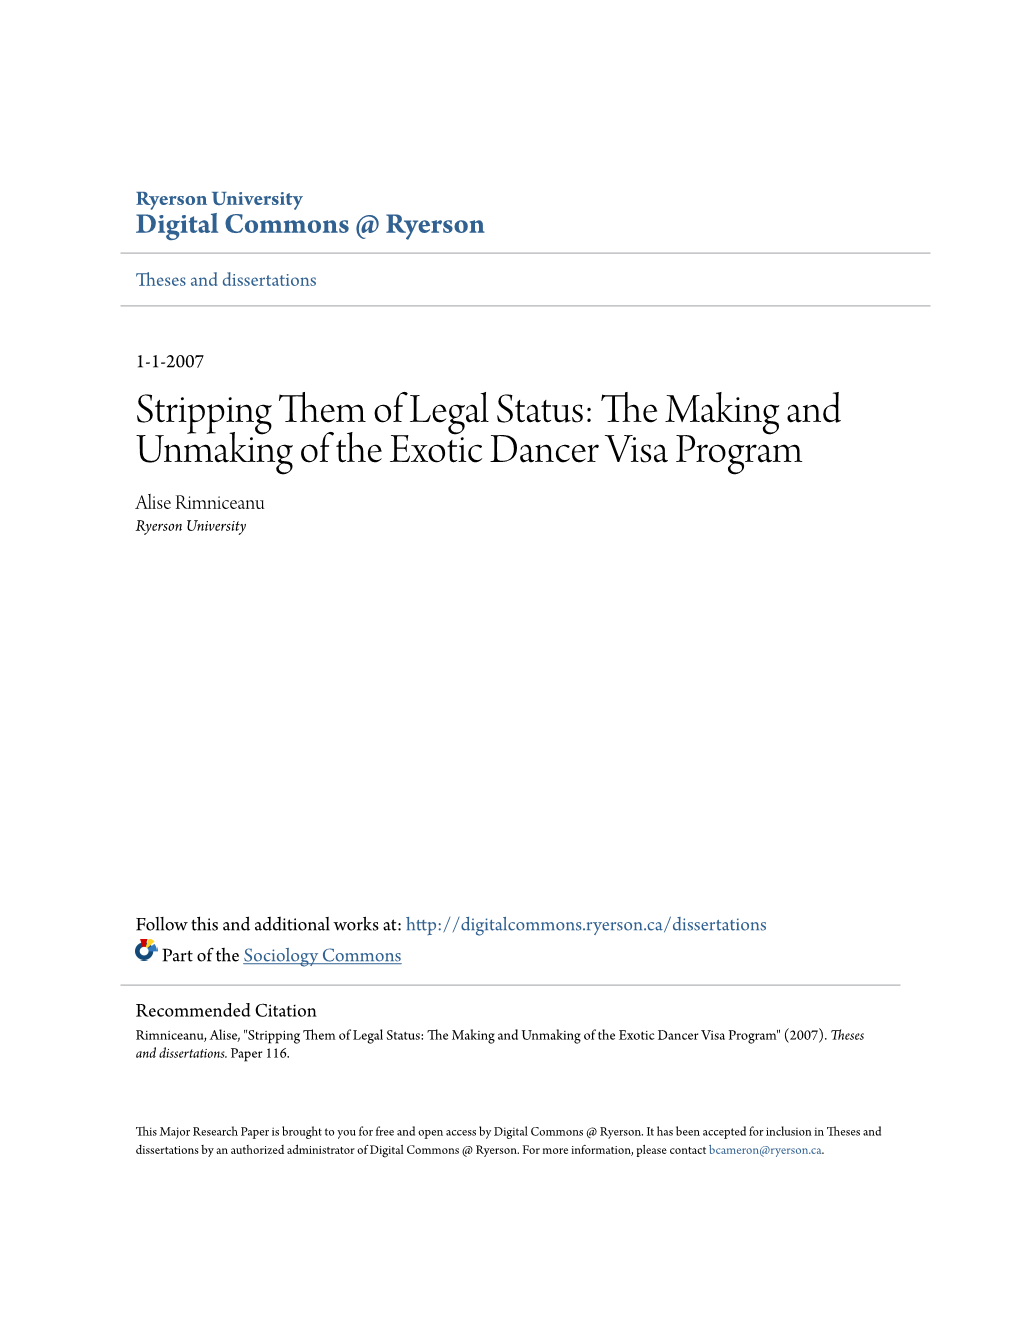 The Making and Unmaking of the Exotic Dancer Visa Program